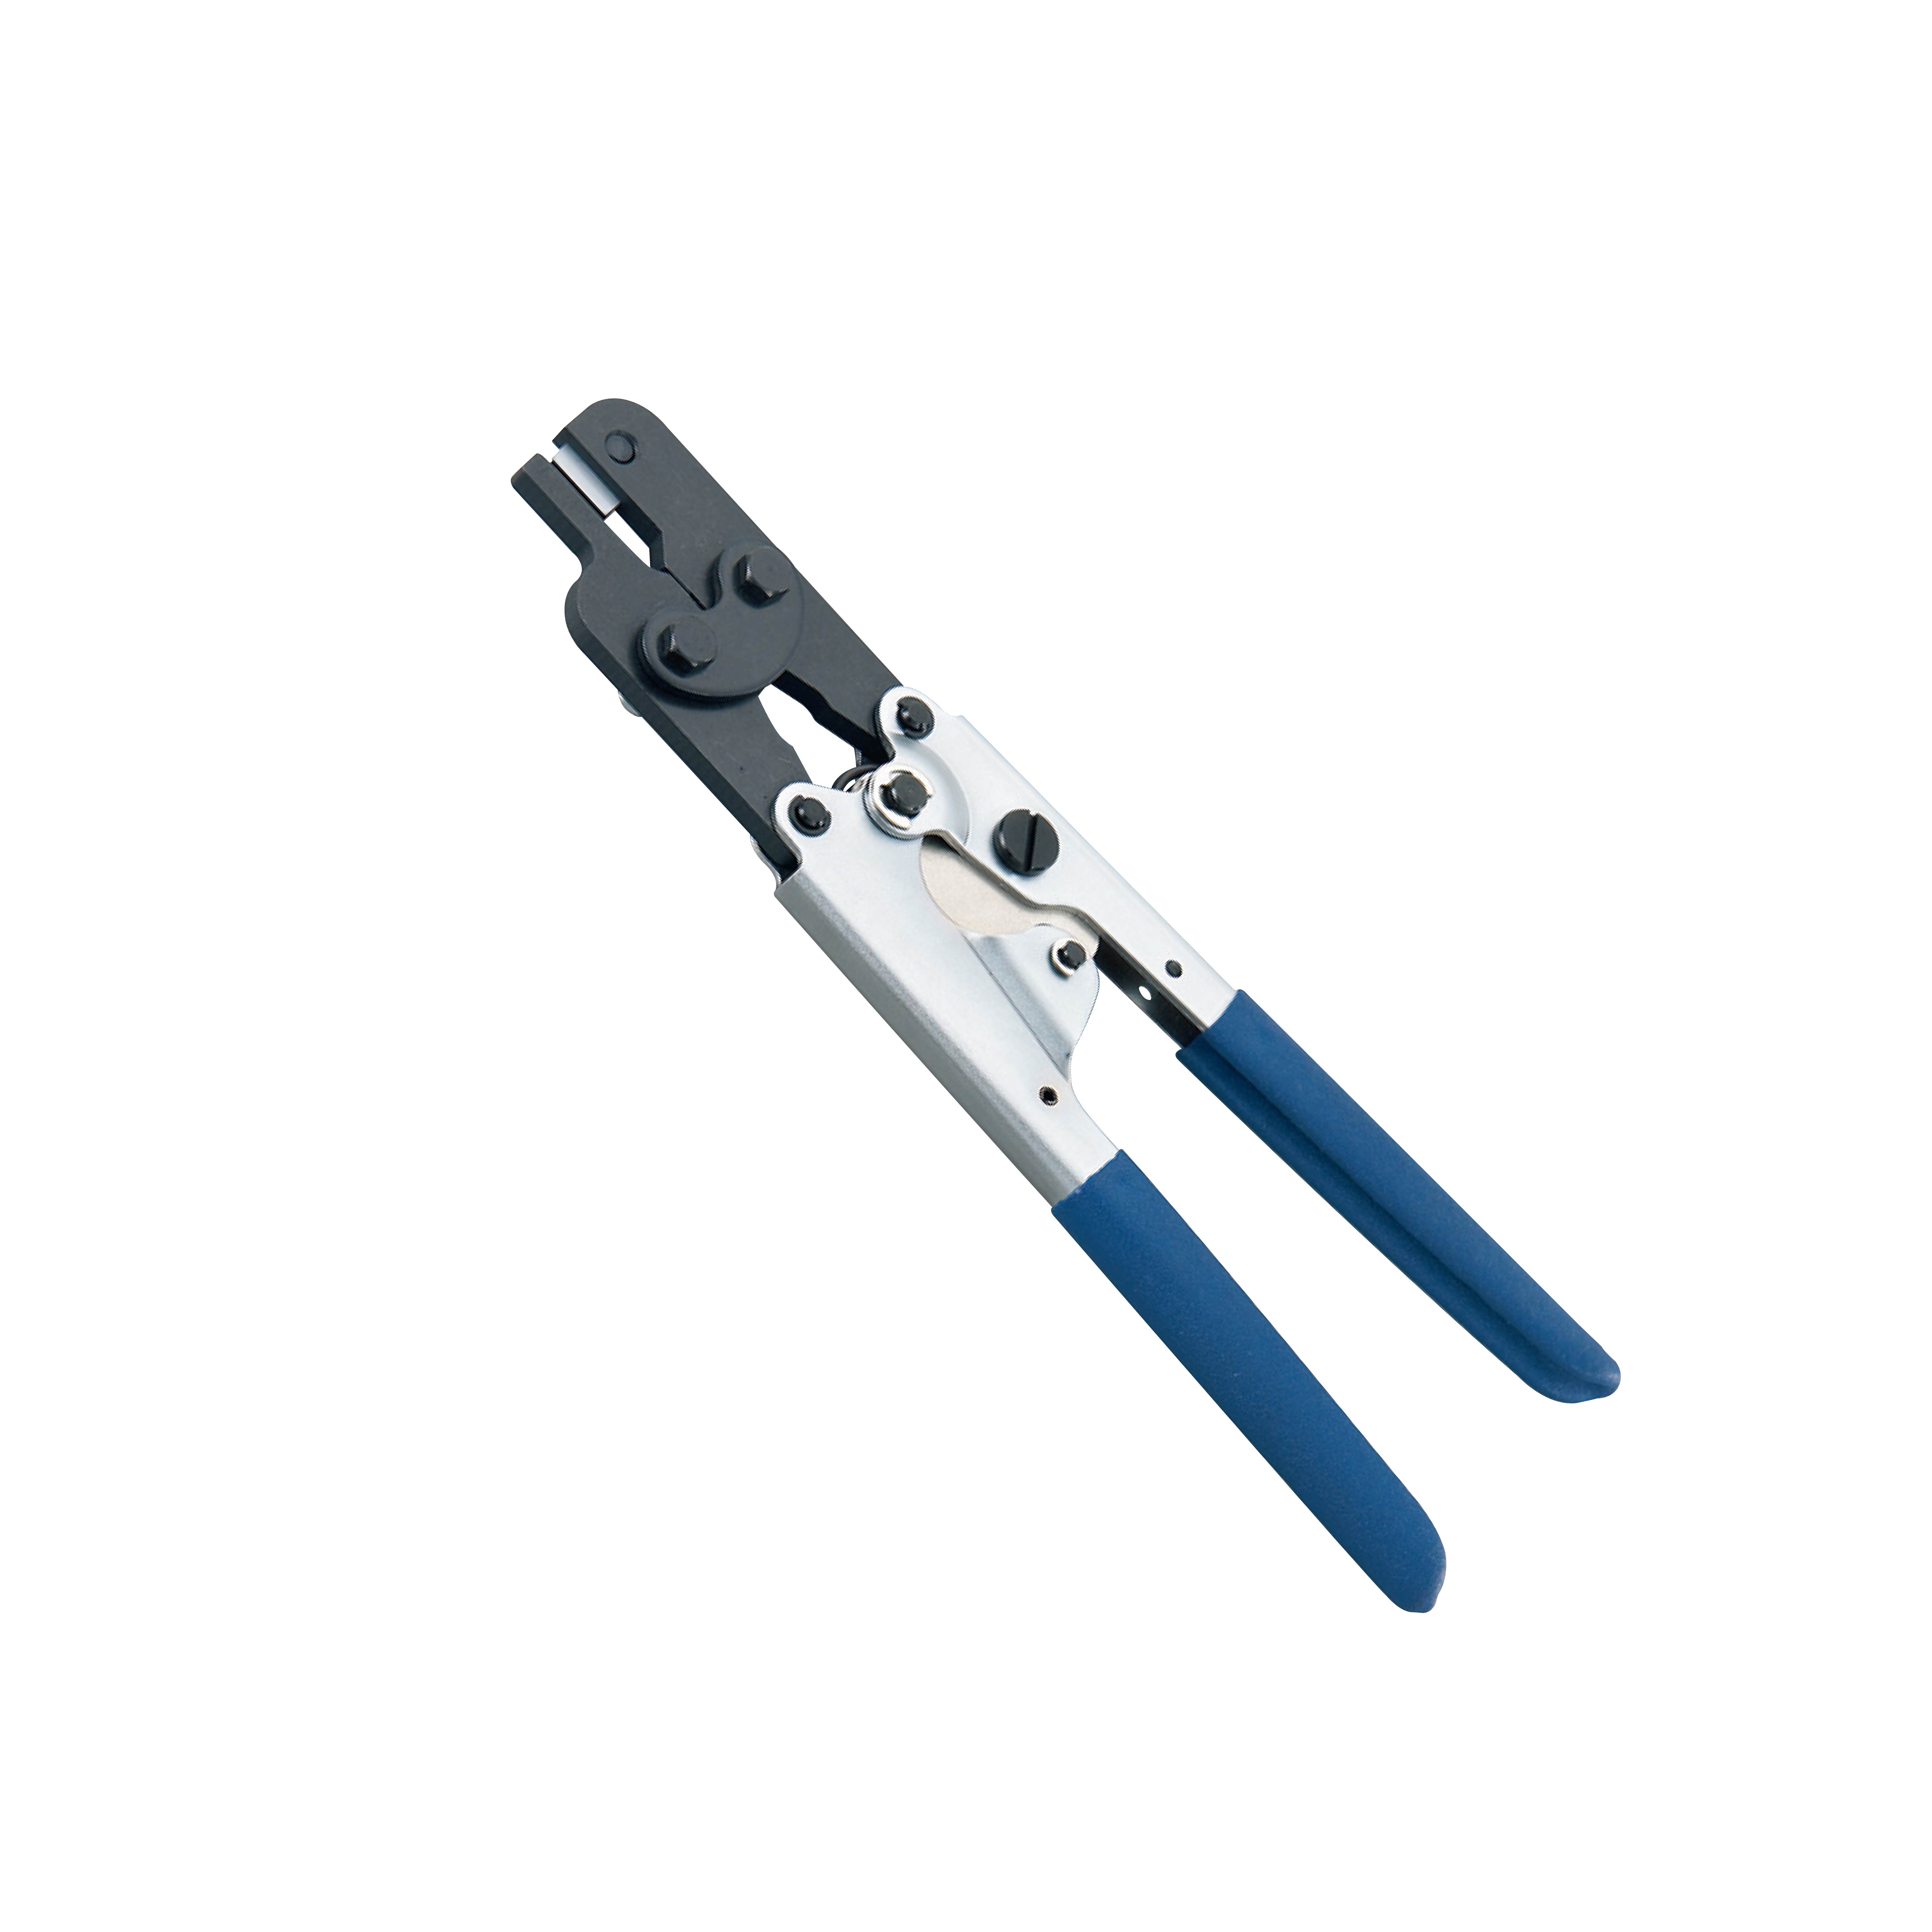 HAND PEX PIPES PLUMBING REMOVAL TOOLS